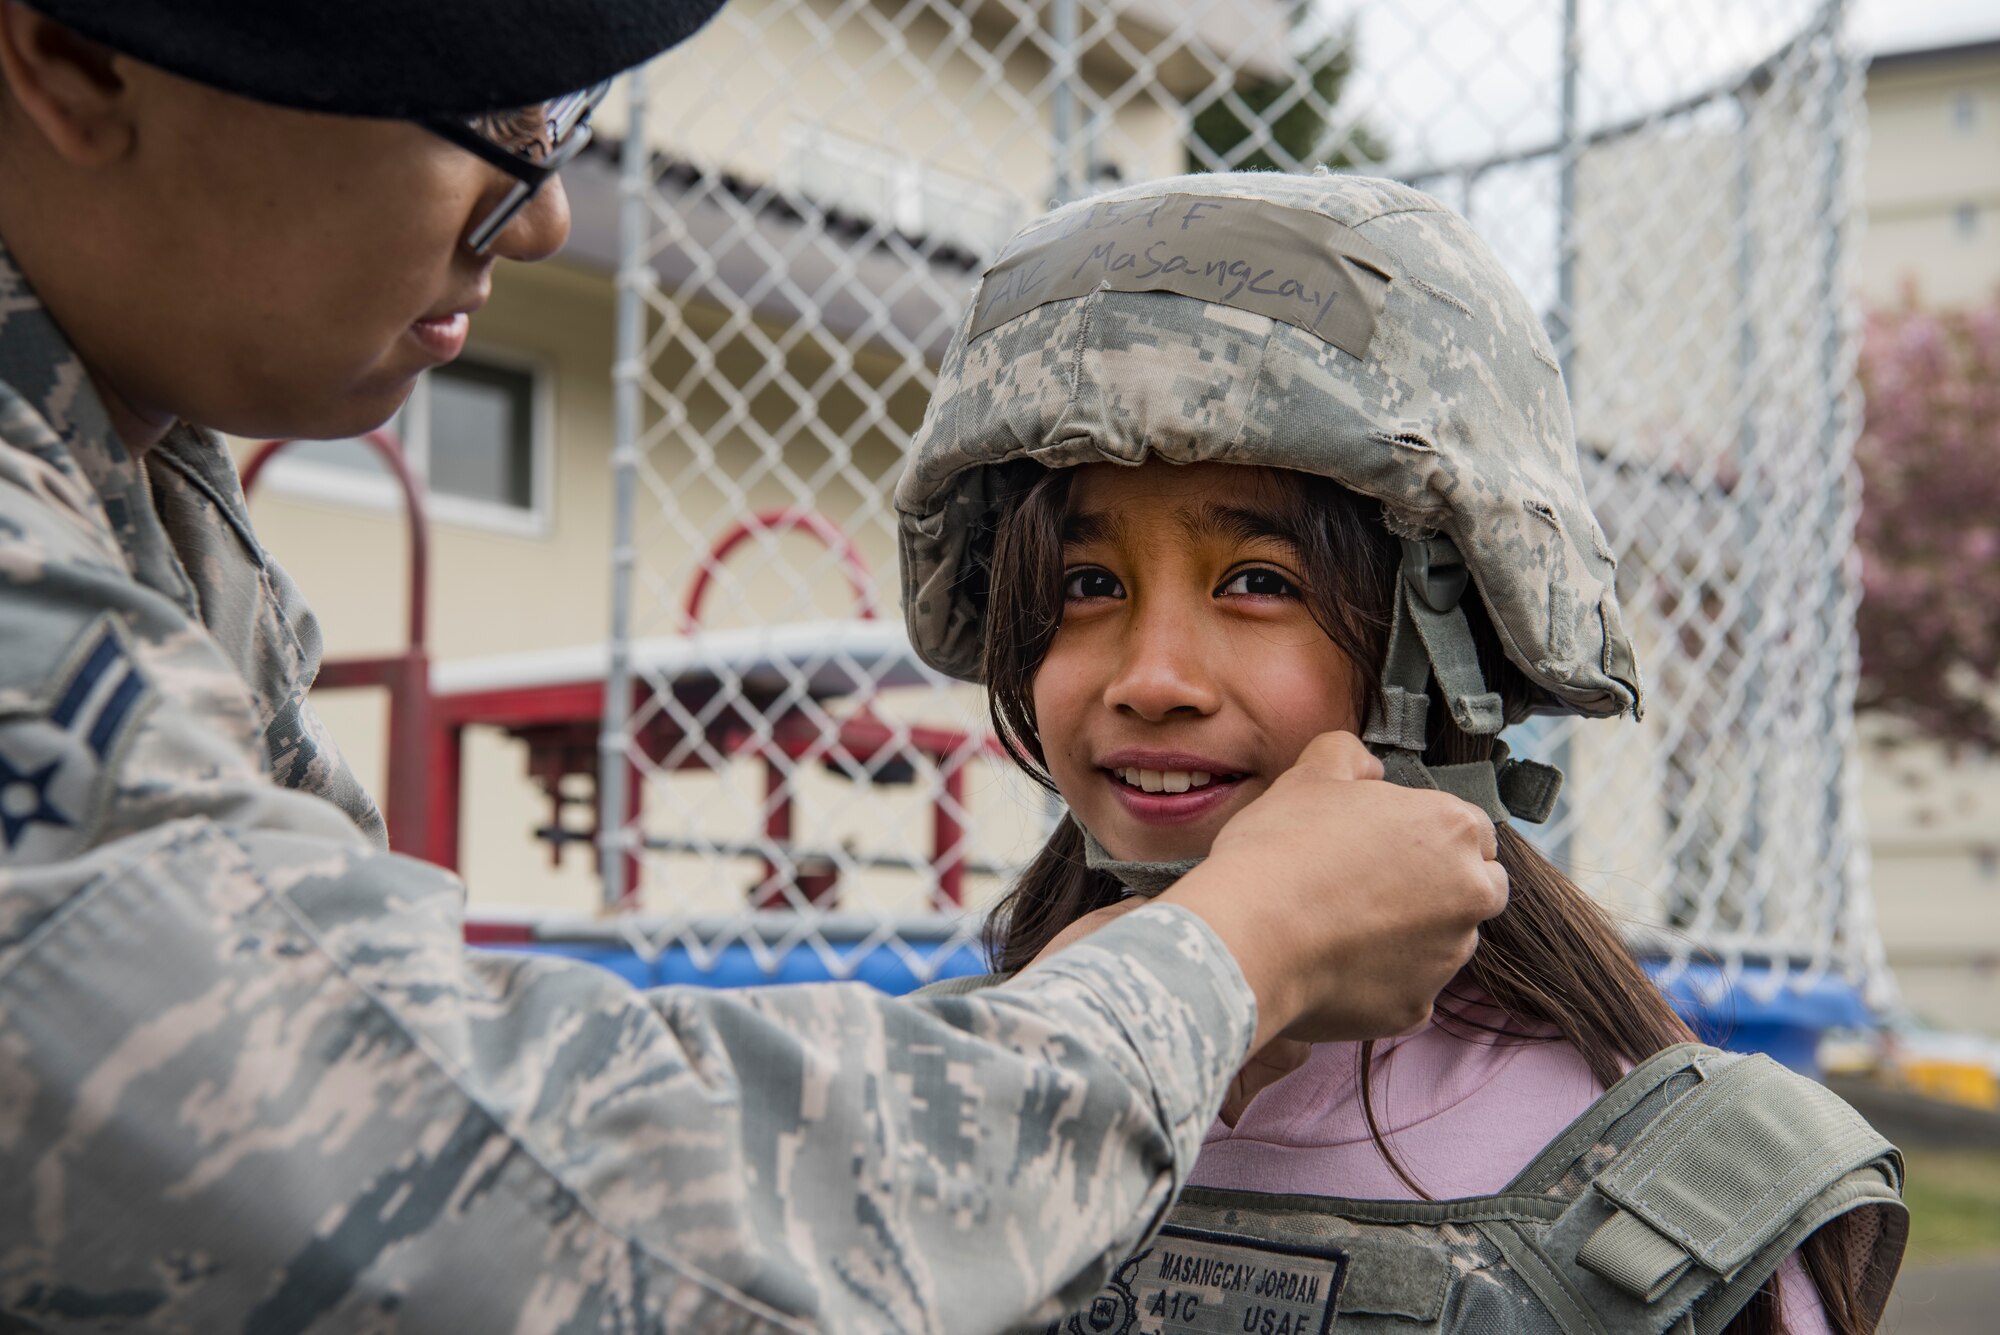 U.S. Air Force Airman 1st Class Aliciana Infante-Crawford, a 35th Security Forces Squadron armory journeyman, helps an attendee try on a helmet during a static display at Misawa Air Base, Japan, May 15, 2019. The National Police Week static display event honored police officers who died in the line of duty. The 35th SFS hosted various events such as a K-9 demonstration, ruck march and a public show with local Japanese police officers. (U.S. Air Force photo by Airman 1st Class Xiomara M. Martinez)